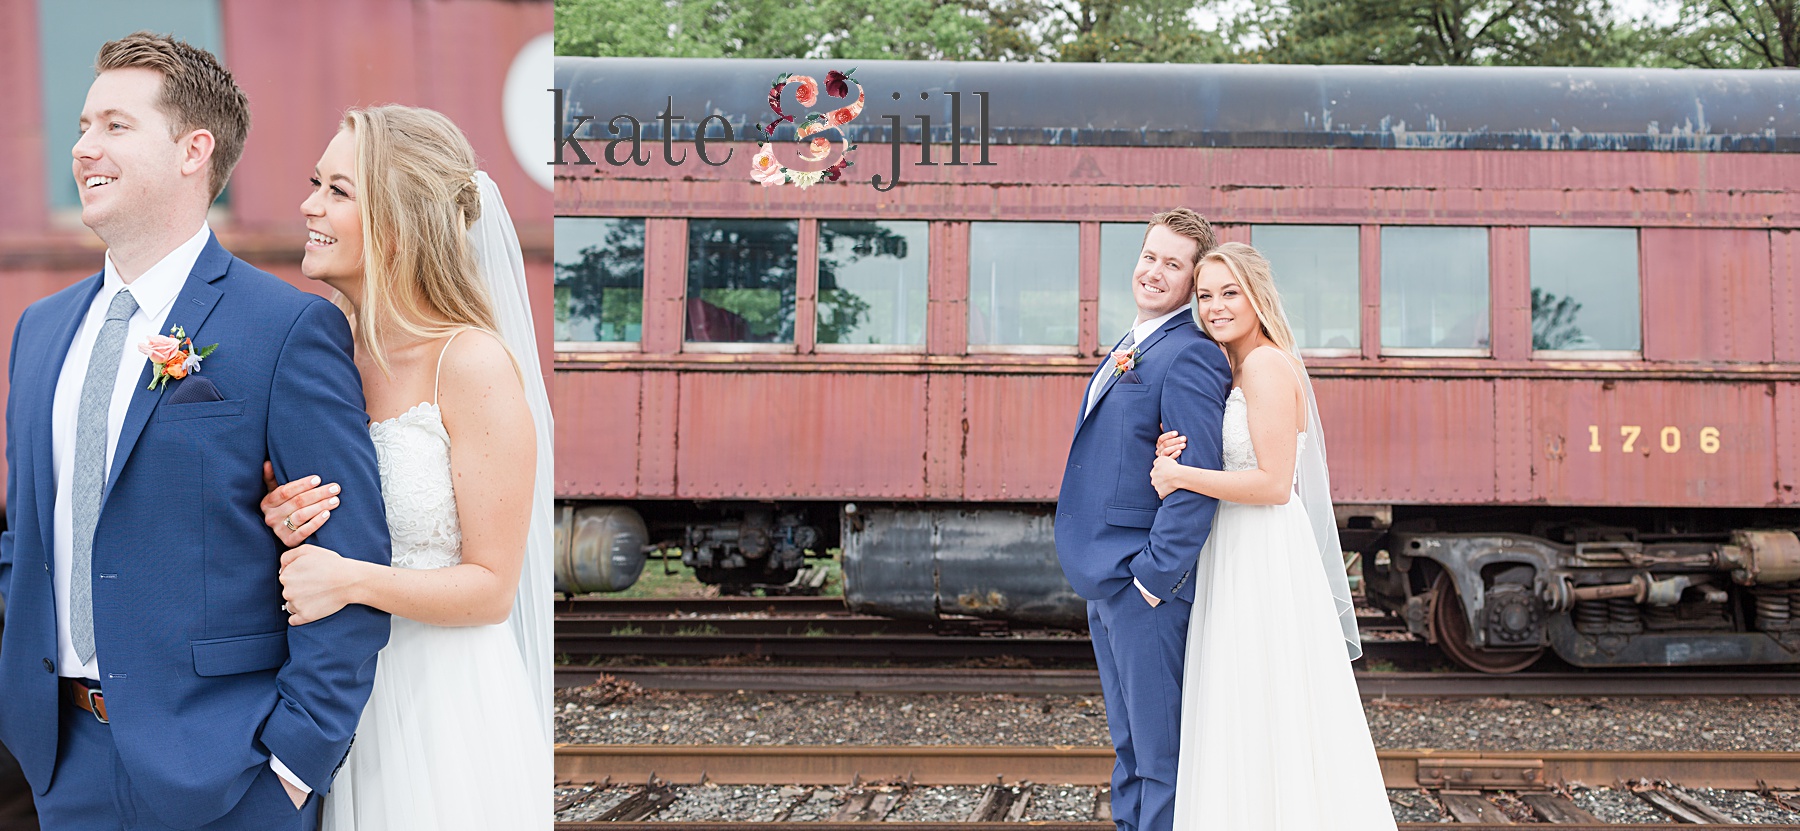 bride and groom in front of train